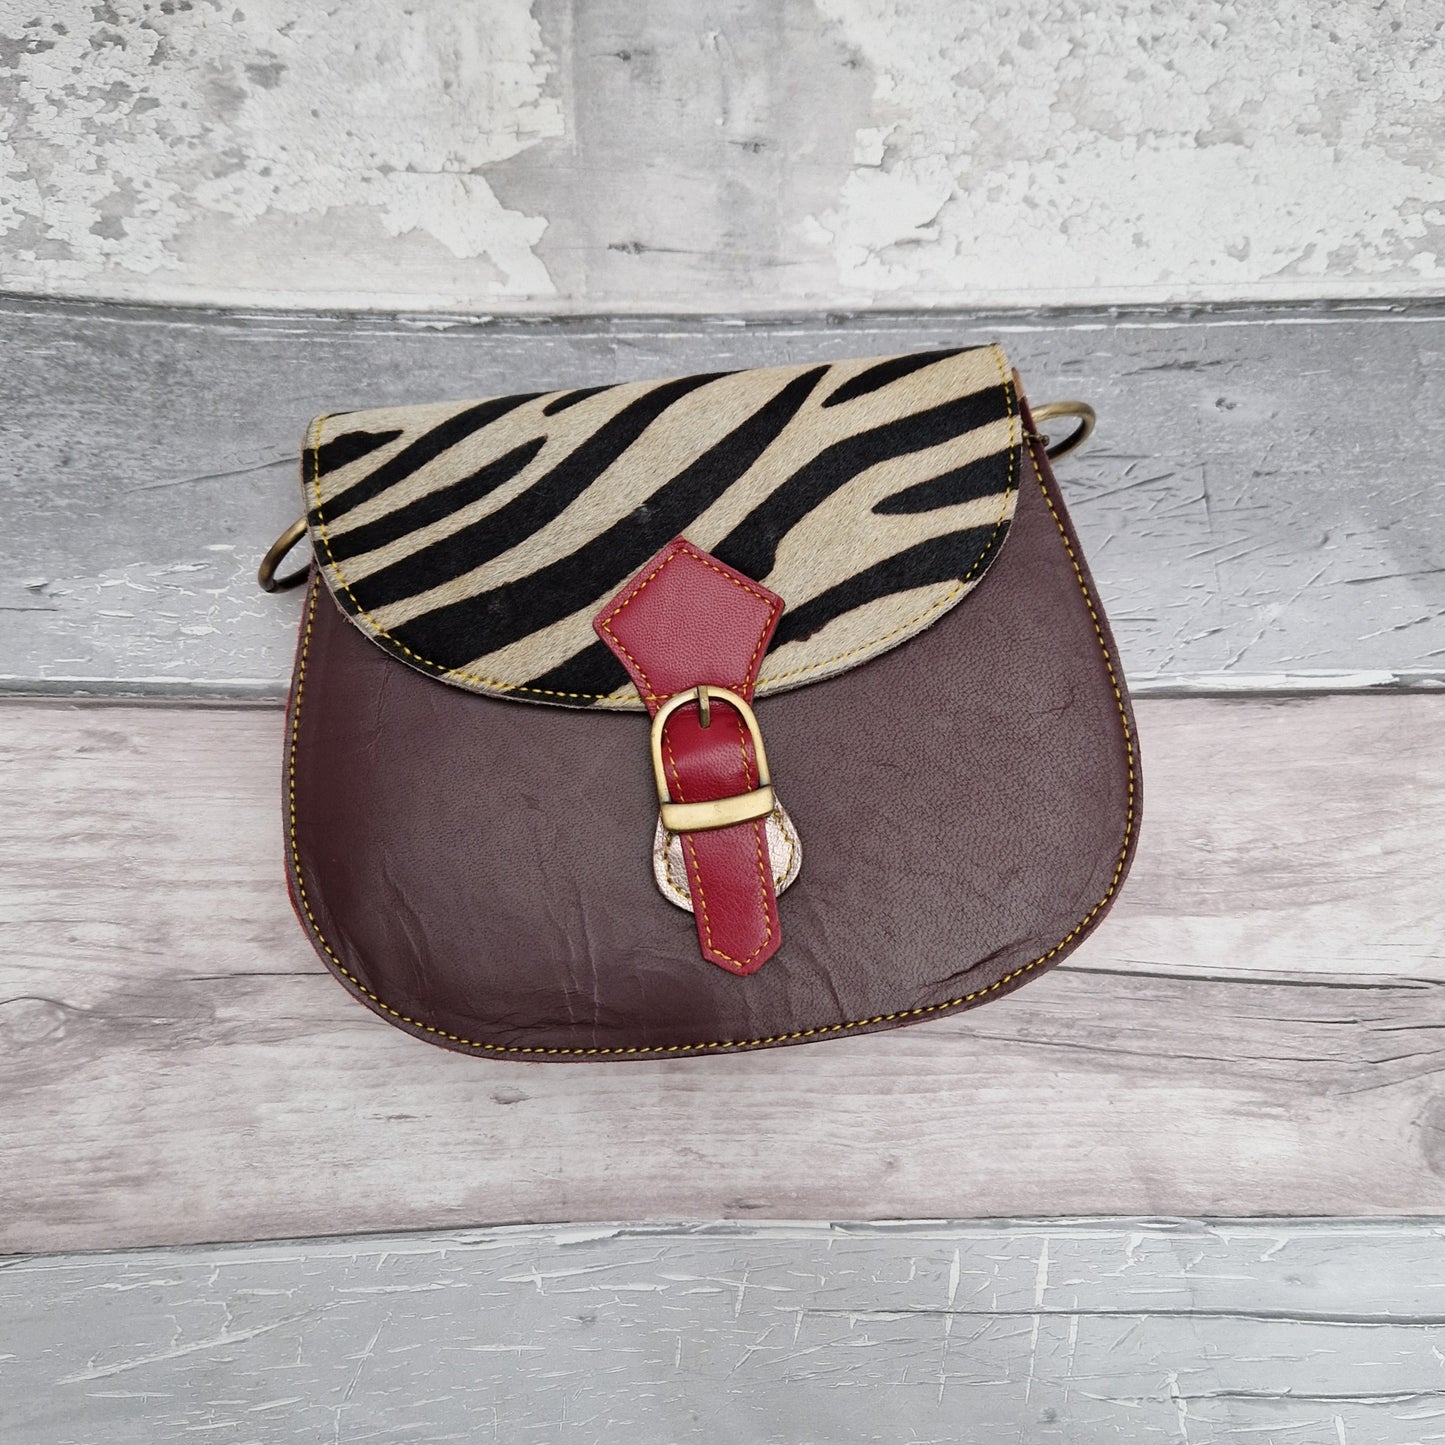 All leather bag made from leather off cuts in different colours and with a textured animal print panel.